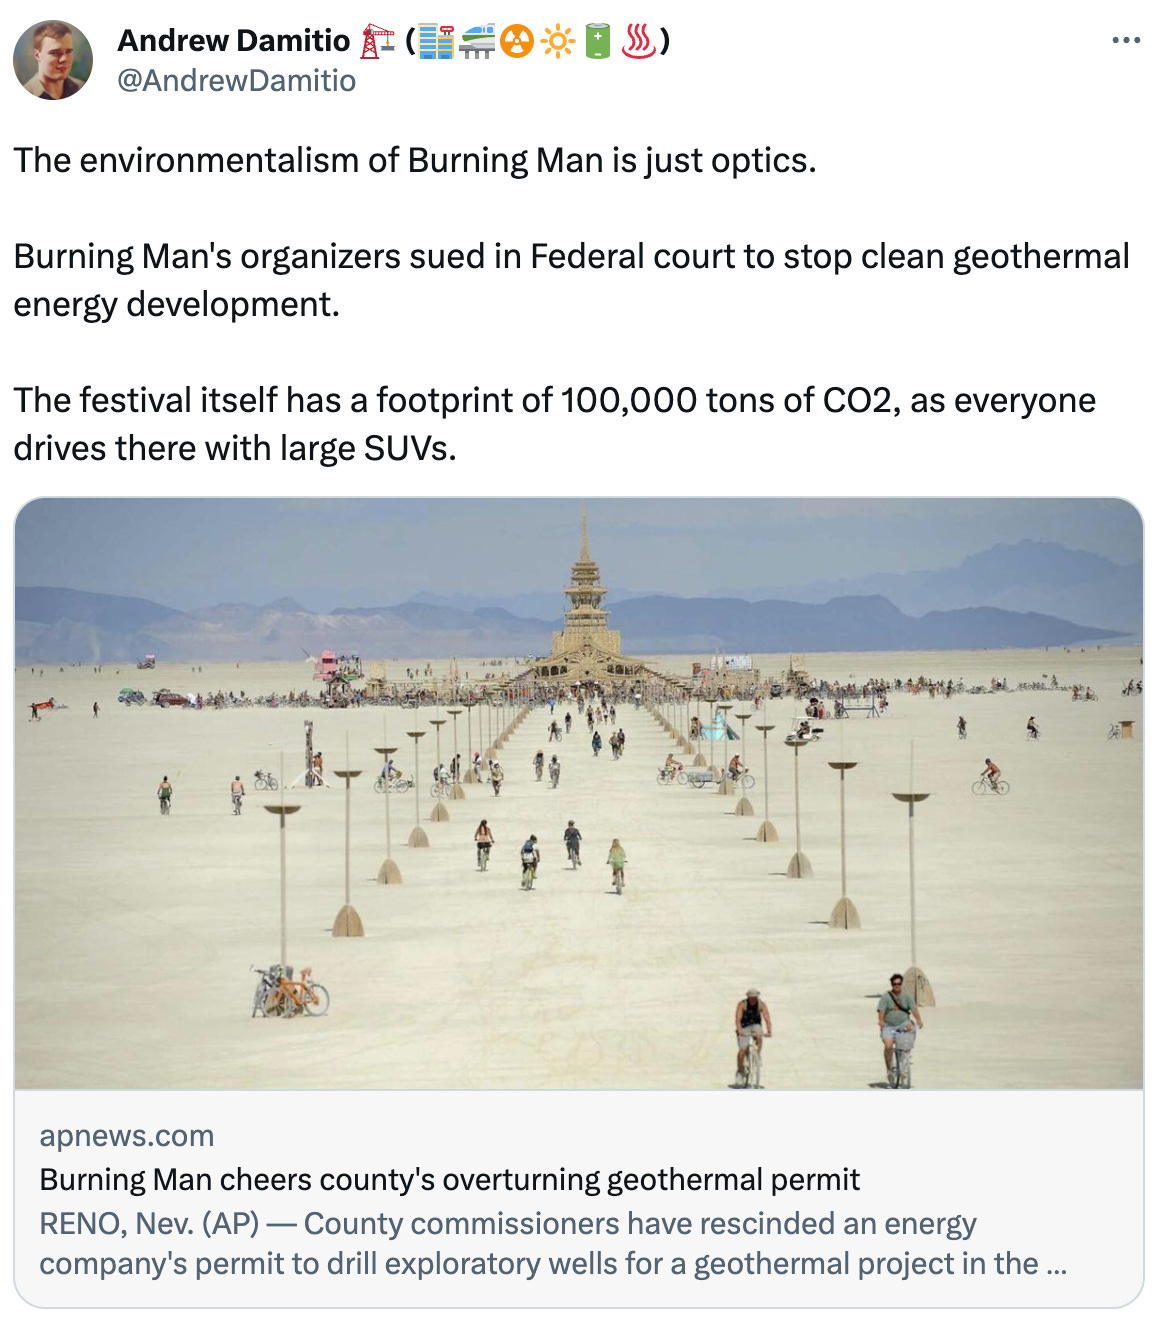  Andrew Damitio 🏗️ (🏬🚝☢️🔆🔋♨️) @AndrewDamitio The environmentalism of Burning Man is just optics.  Burning Man's organizers sued in Federal court to stop clean geothermal energy development.   The festival itself has a footprint of 100,000 tons of CO2, as everyone drives there with large SUVs. apnews.com Burning Man cheers county's overturning geothermal permit RENO, Nev. (AP) — County commissioners have rescinded an energy company's permit to drill exploratory wells for a geothermal project in the Nevada desert near the site of the annual Burning Man...